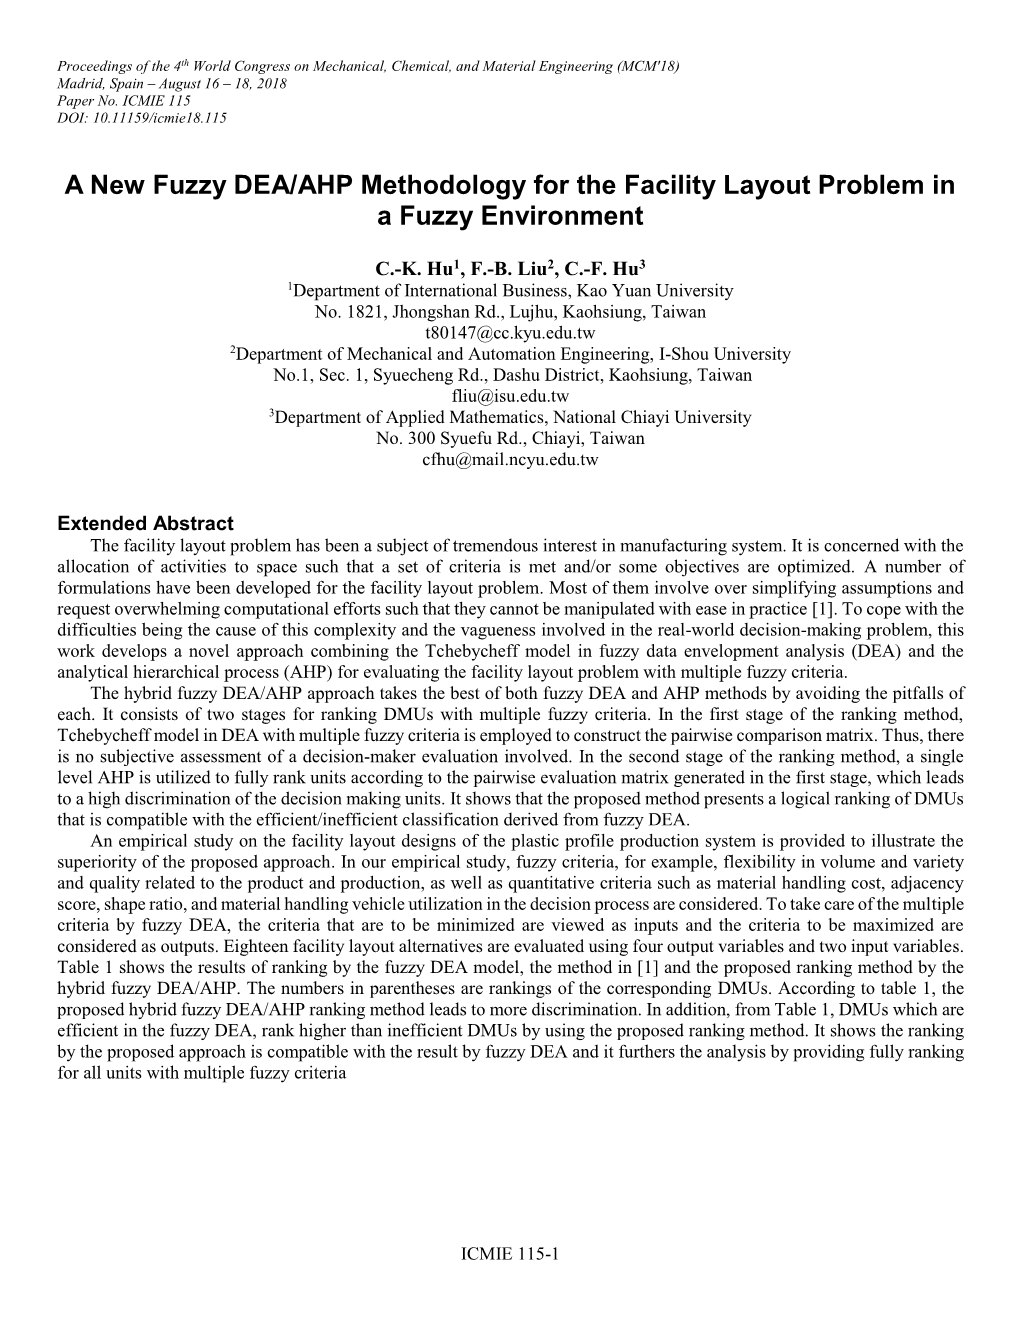 A New Fuzzy DEA/AHP Methodology for the Facility Layout Problem in a Fuzzy Environment